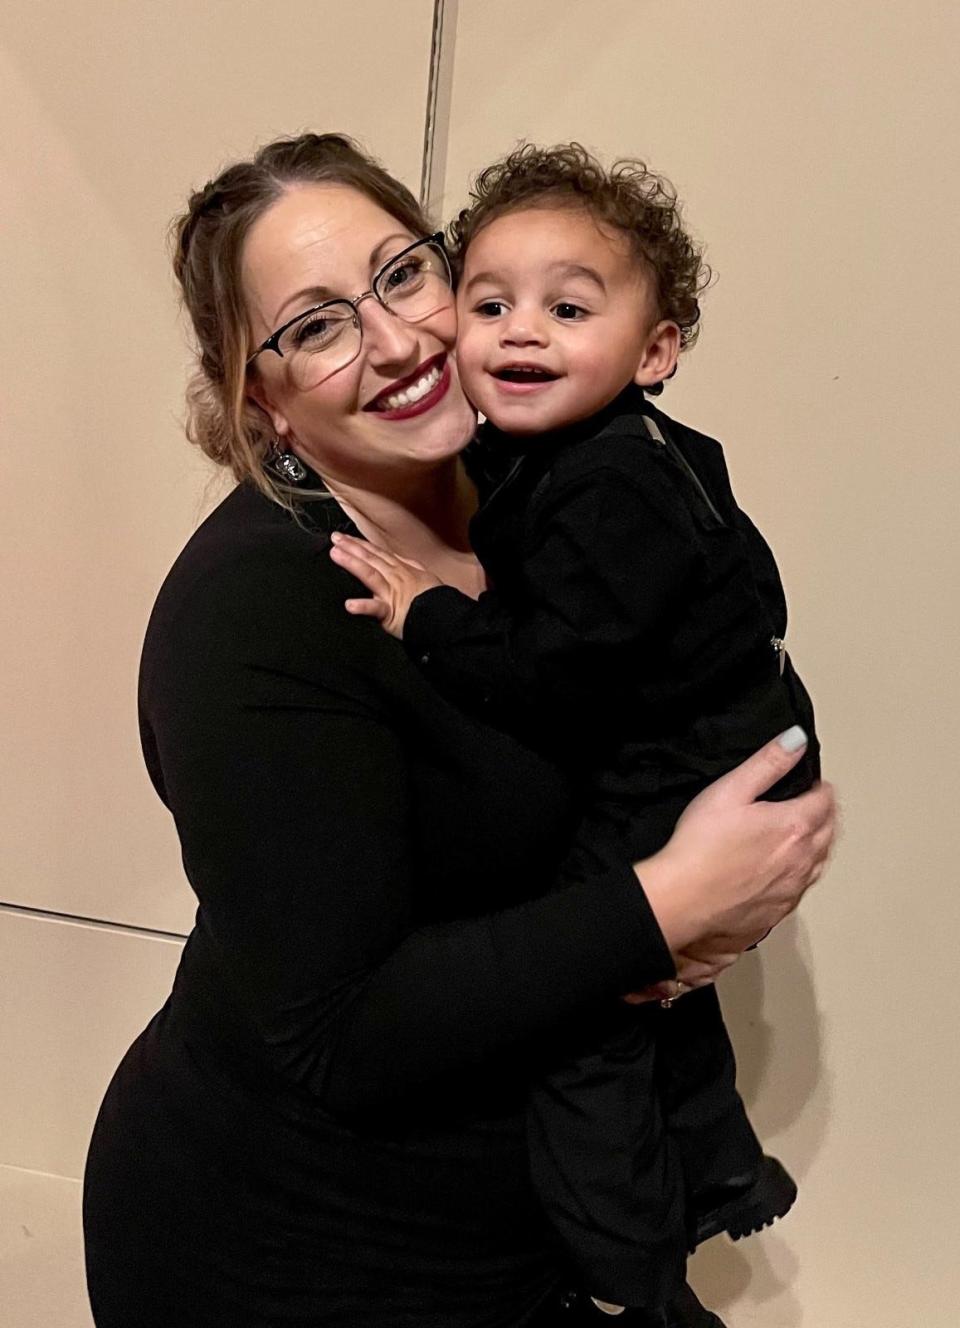 Melissa Carreiro, owner of Little Wanderers Sensory Play, poses with her son Maddox, now 3.